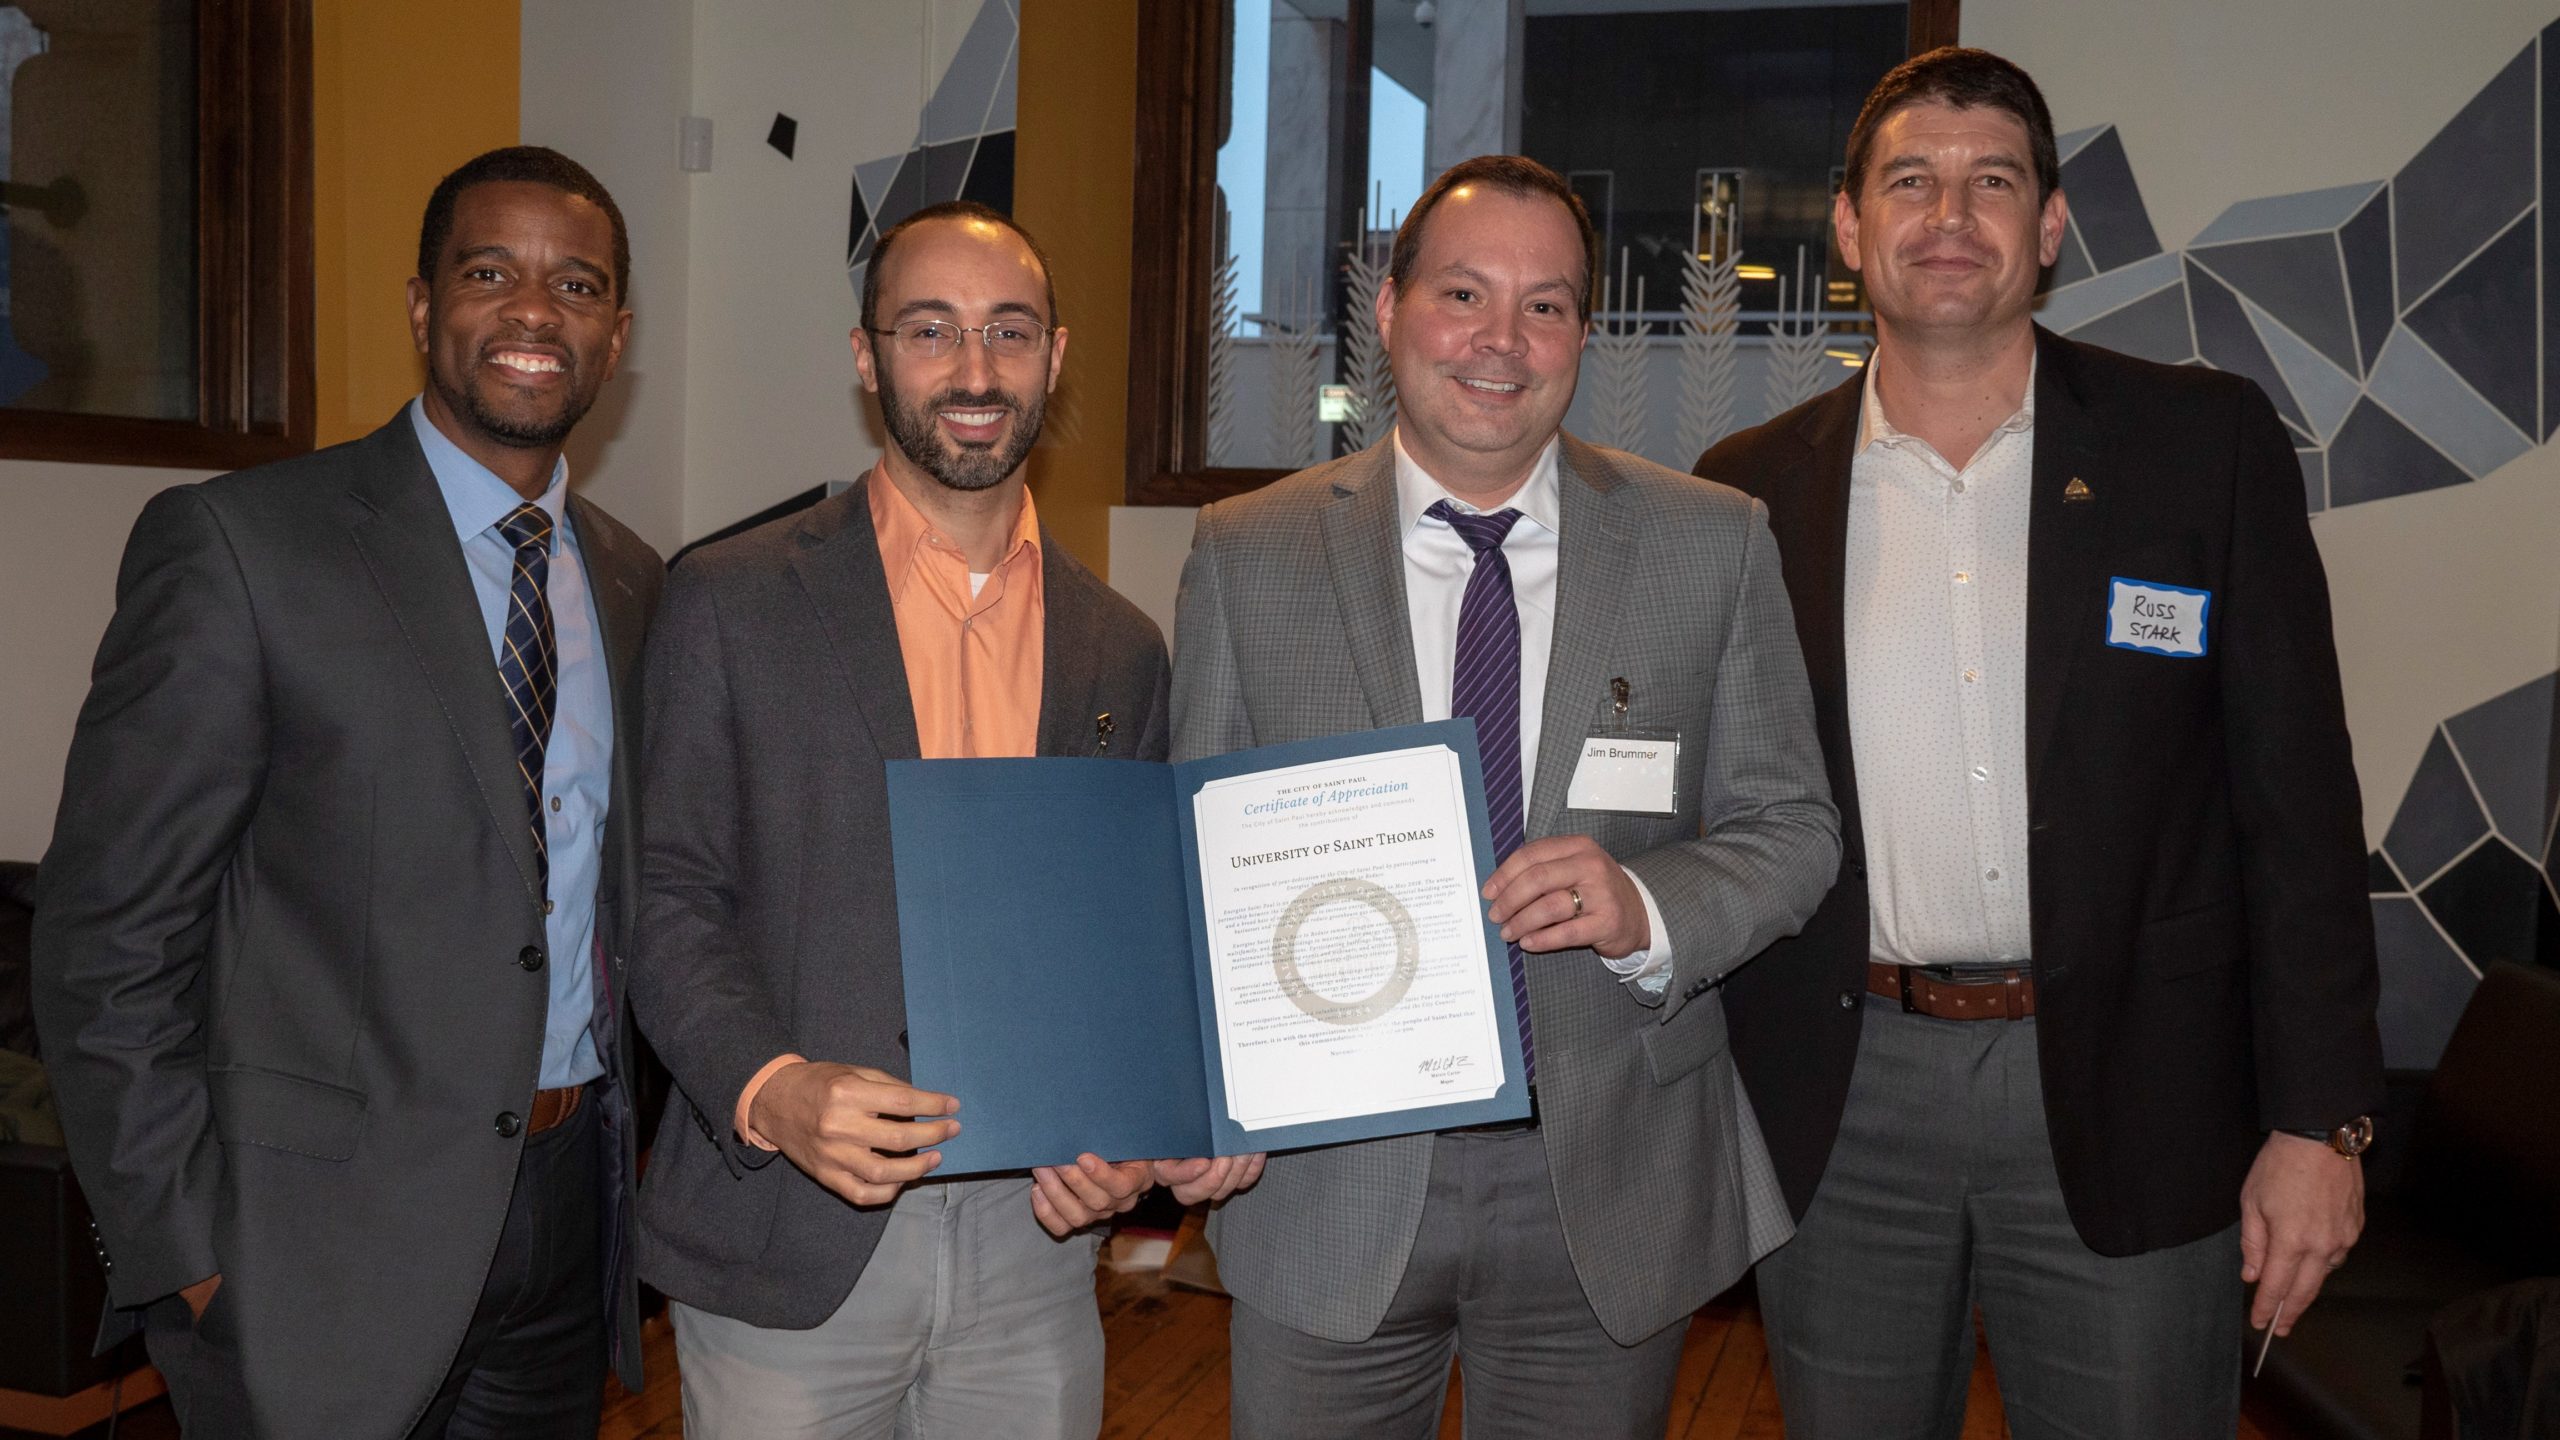 (l-r) St. Paul Mayor Melvin Carter, St. Thomas assistant director of sustainability Amir Nadav, associate vice president of facilities management Jim Brummer, and St. Paul's "Chief Resilience Officer" Russ Stark pose for a photo with St. Thomas' recognition in the city's Race to Reduce program.